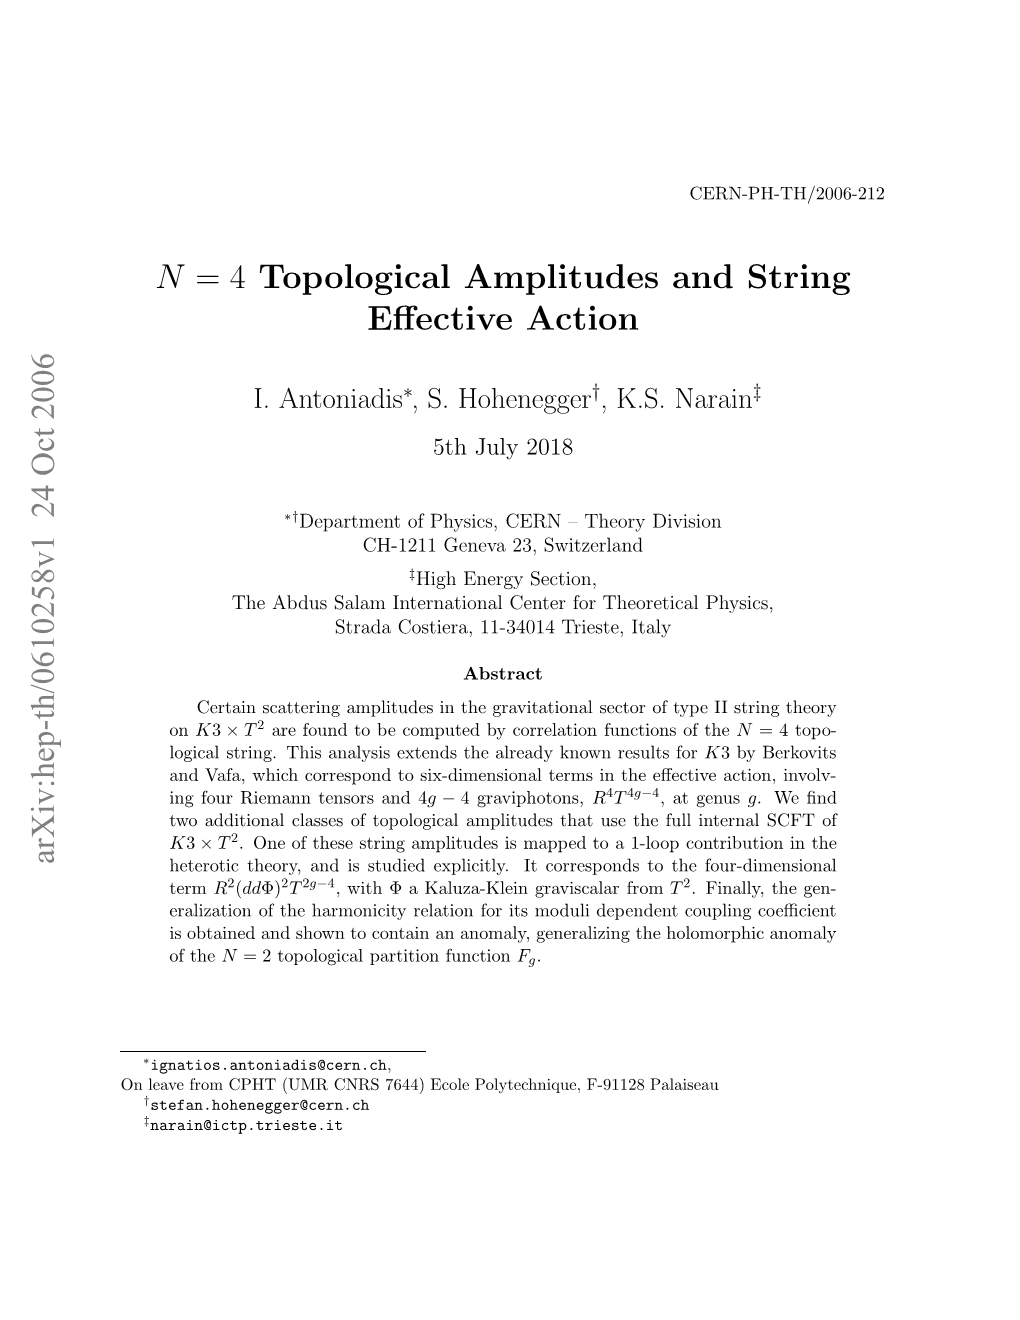 N= 4 Topological Amplitudes and String Effective Action